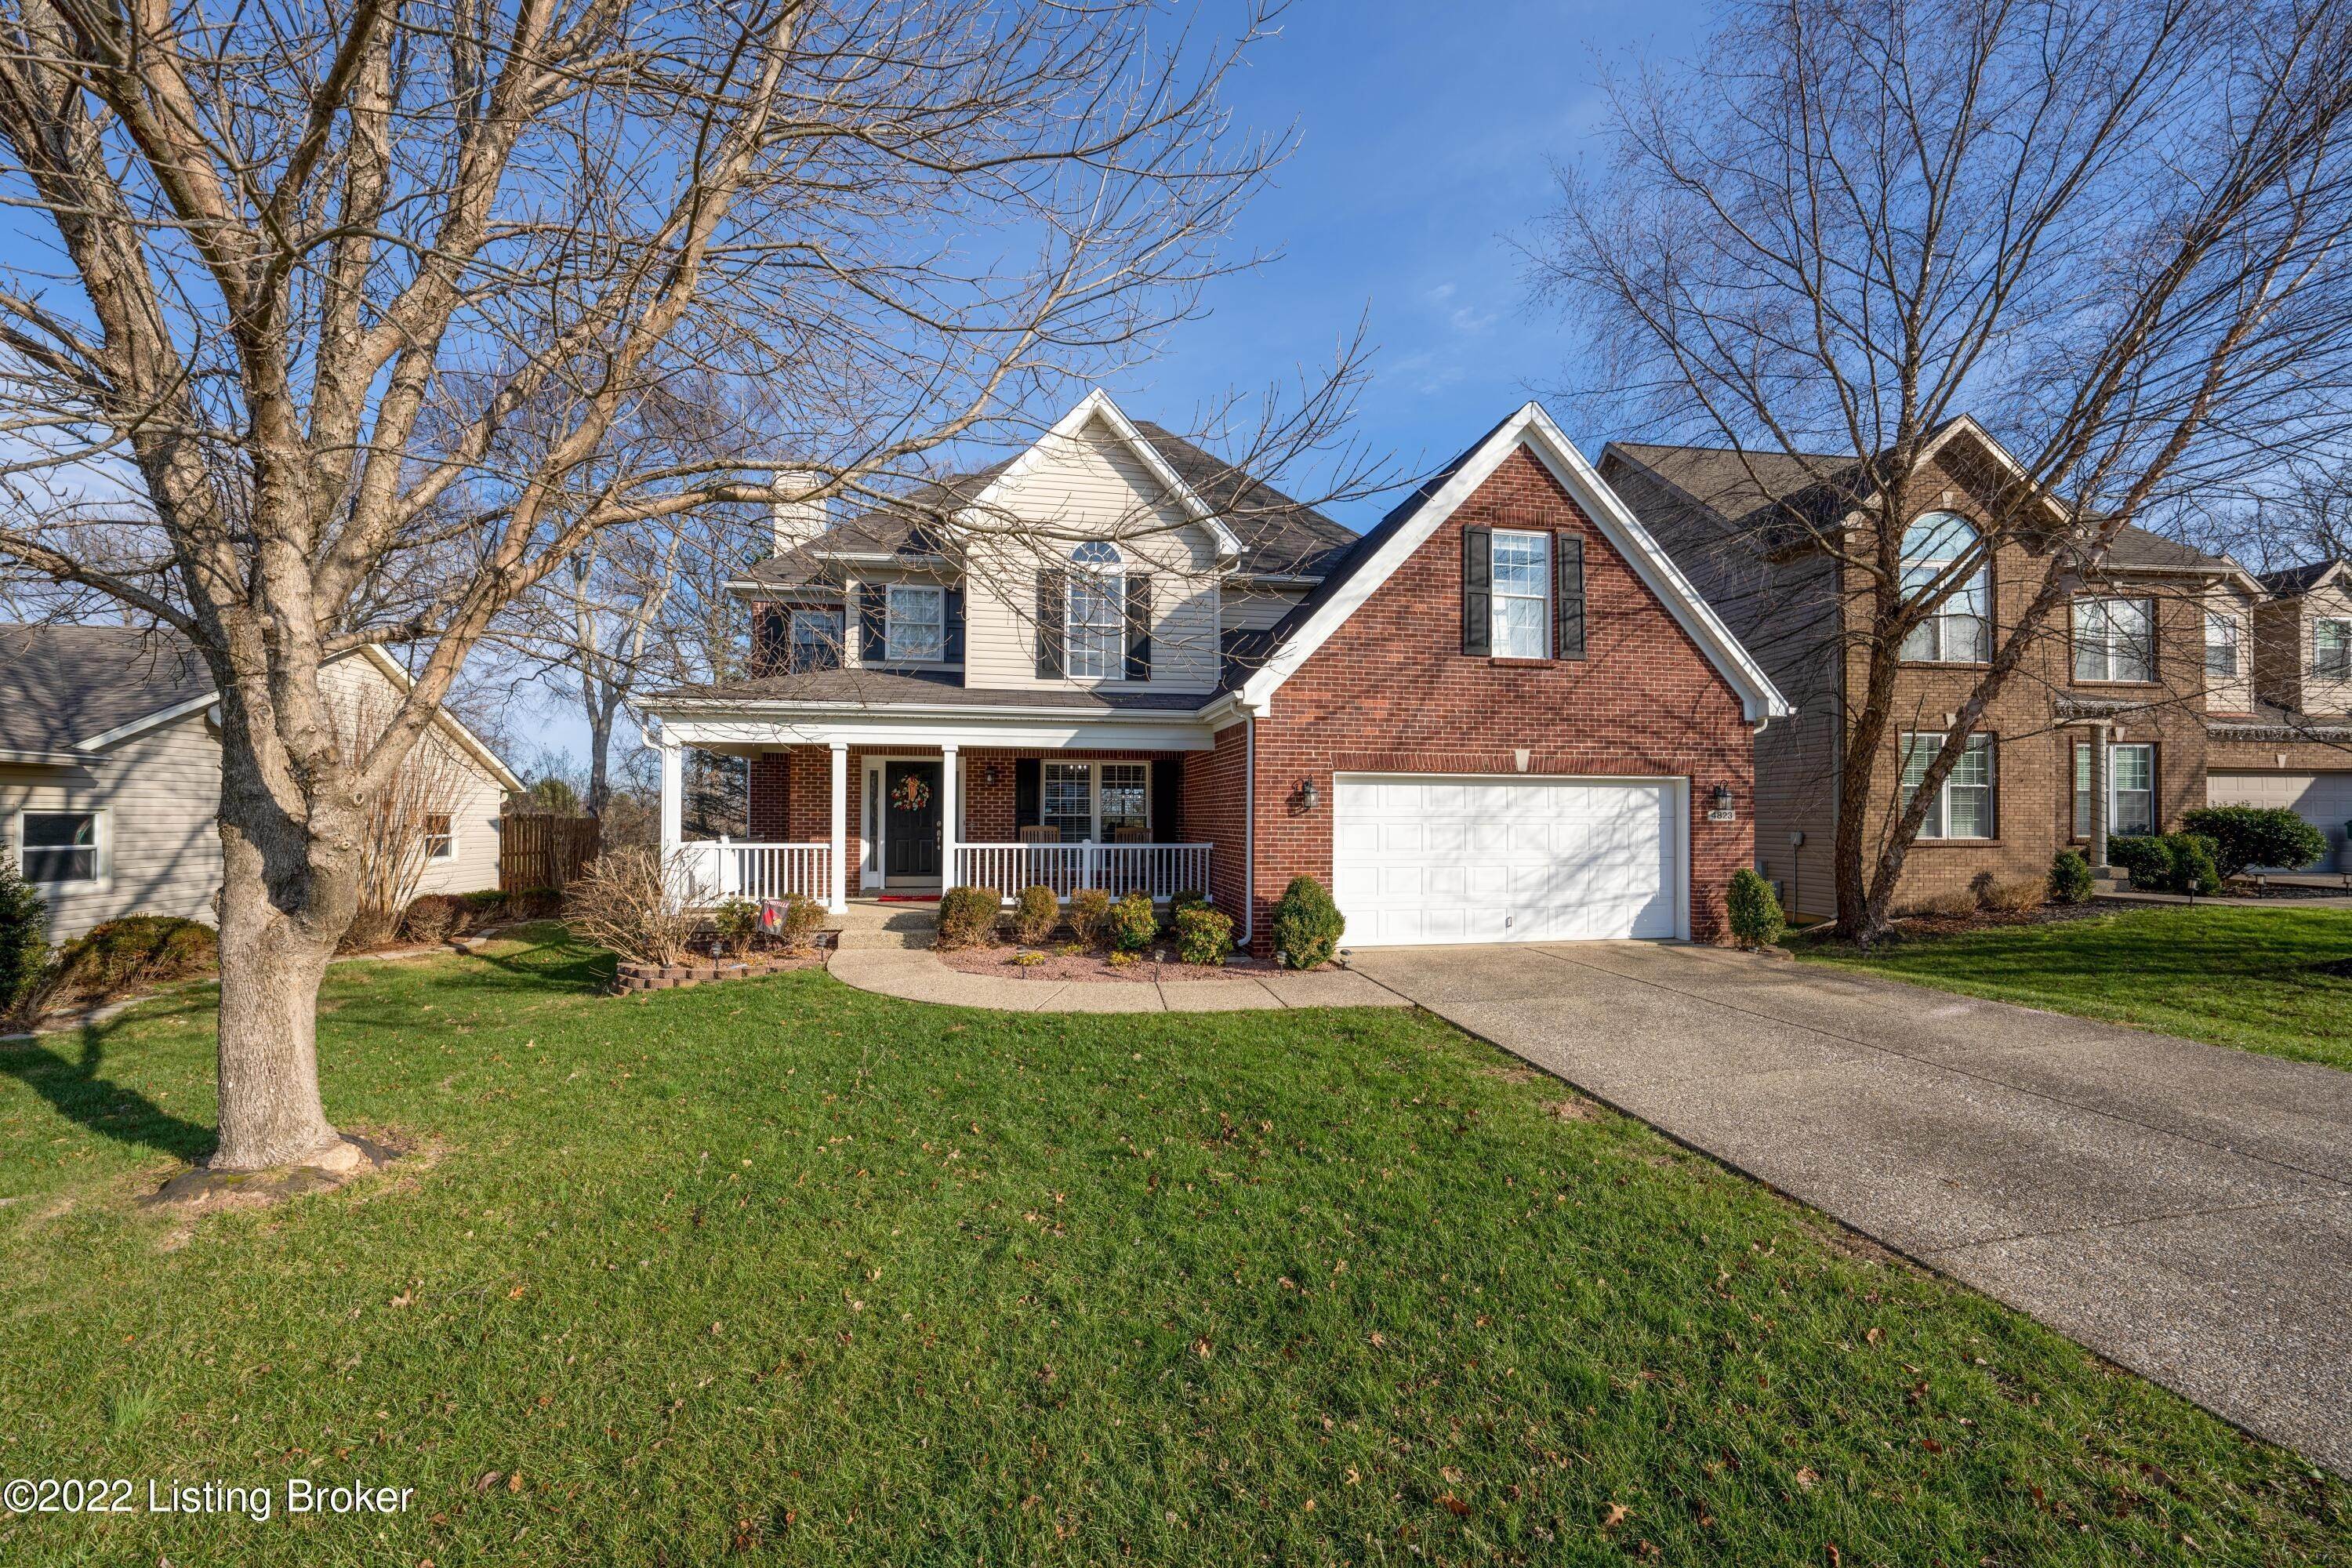 44. Single Family at Louisville, KY 40299